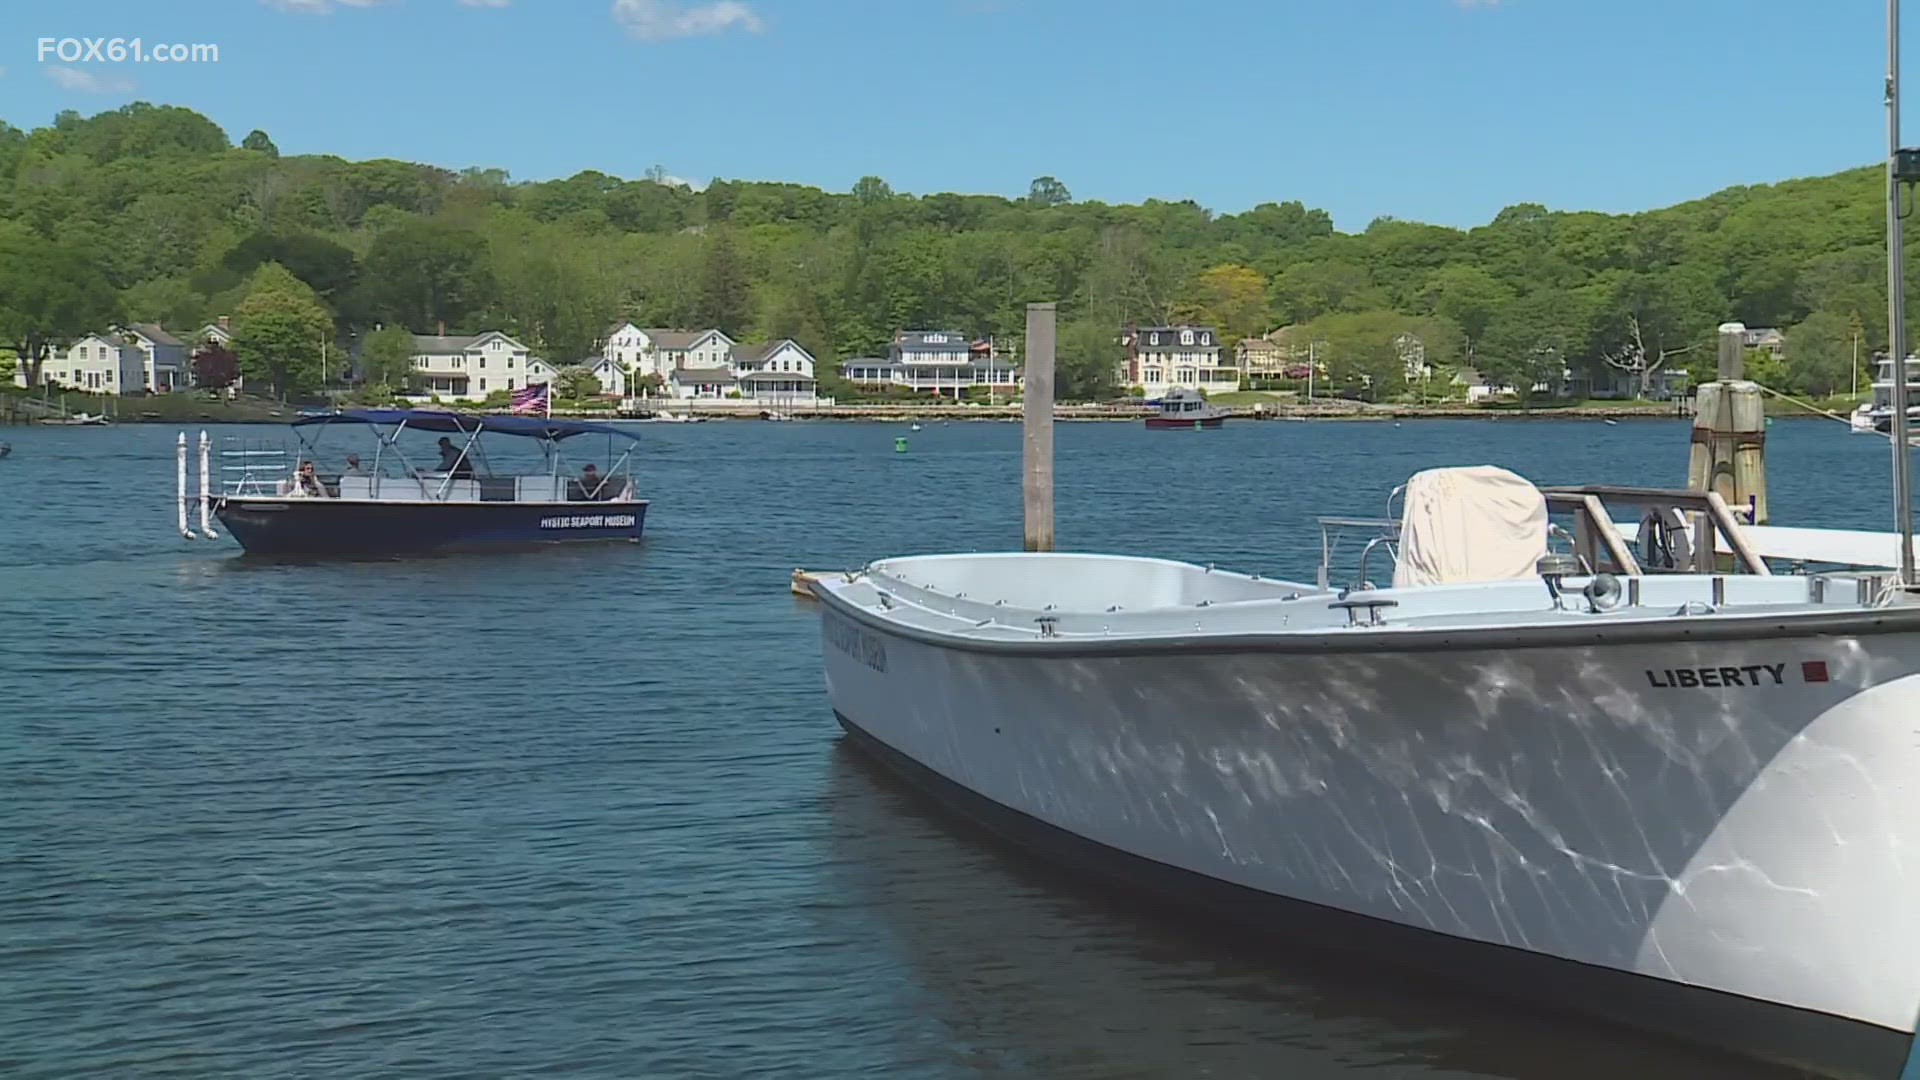 The Mystic Seaport Express is a 17-passenger boat that will ferry guests from the drawbridge area in downtown Mystic to the Mystic Seaport Museum grounds